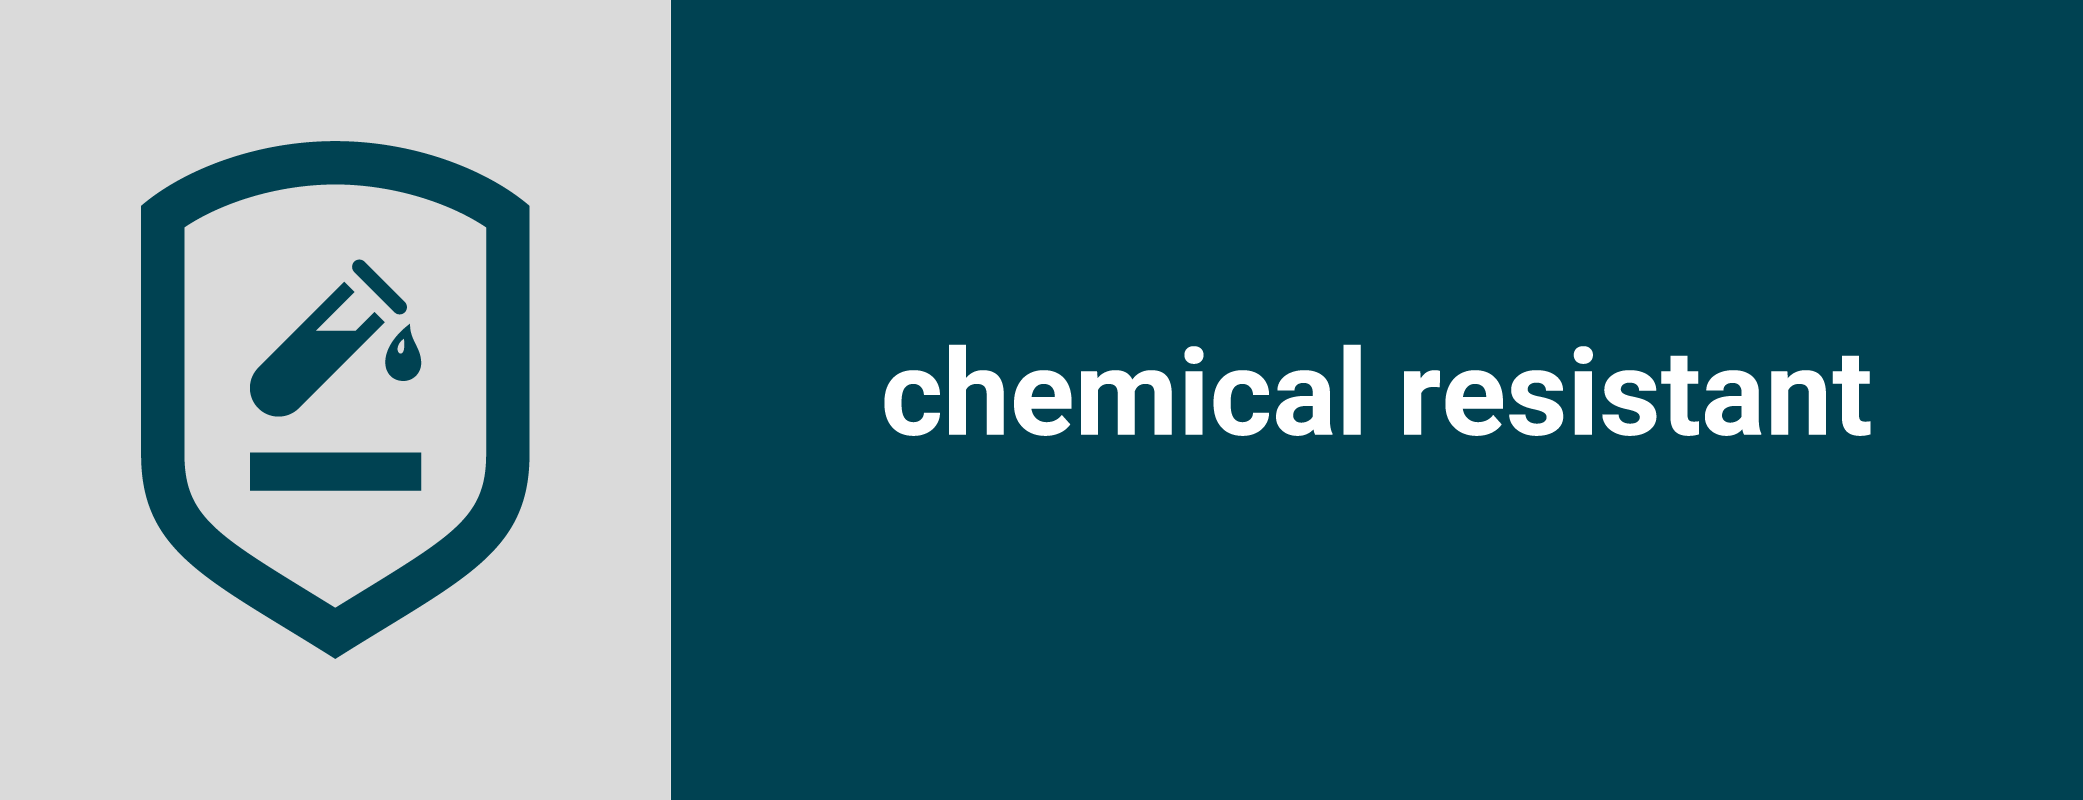 chemical resistant